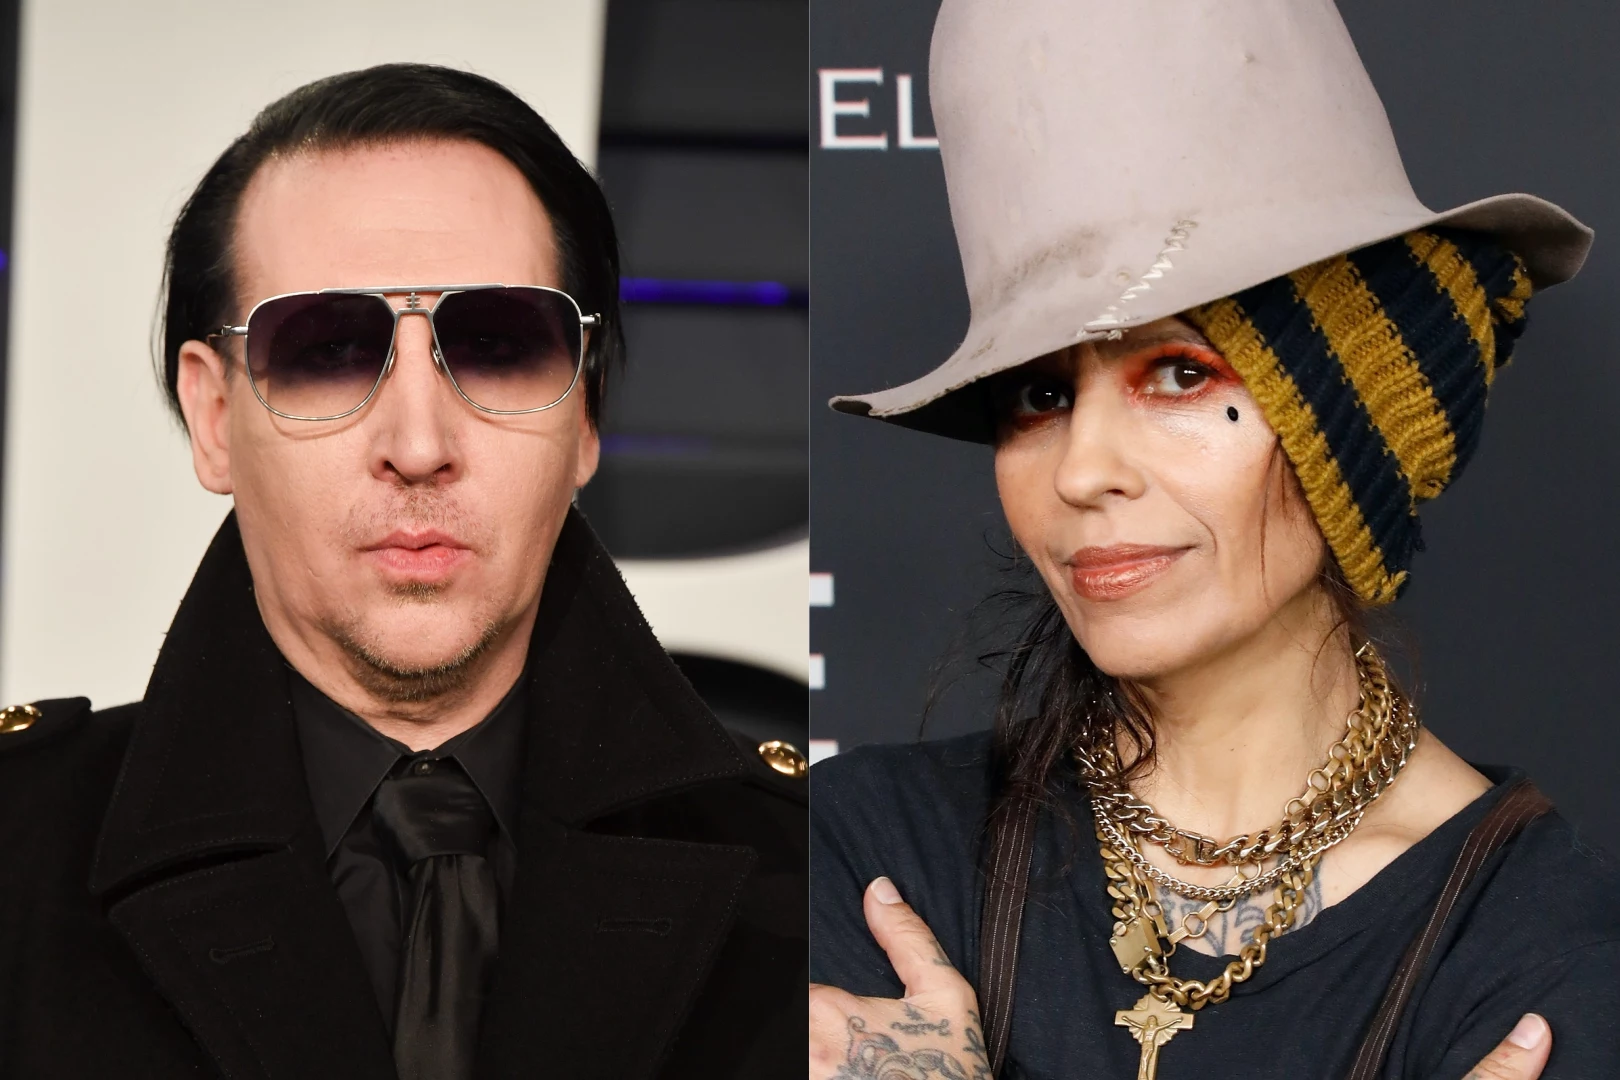 WATCH: Marilyn Manson Performs 'Sweet Dreams' With Linda Perry